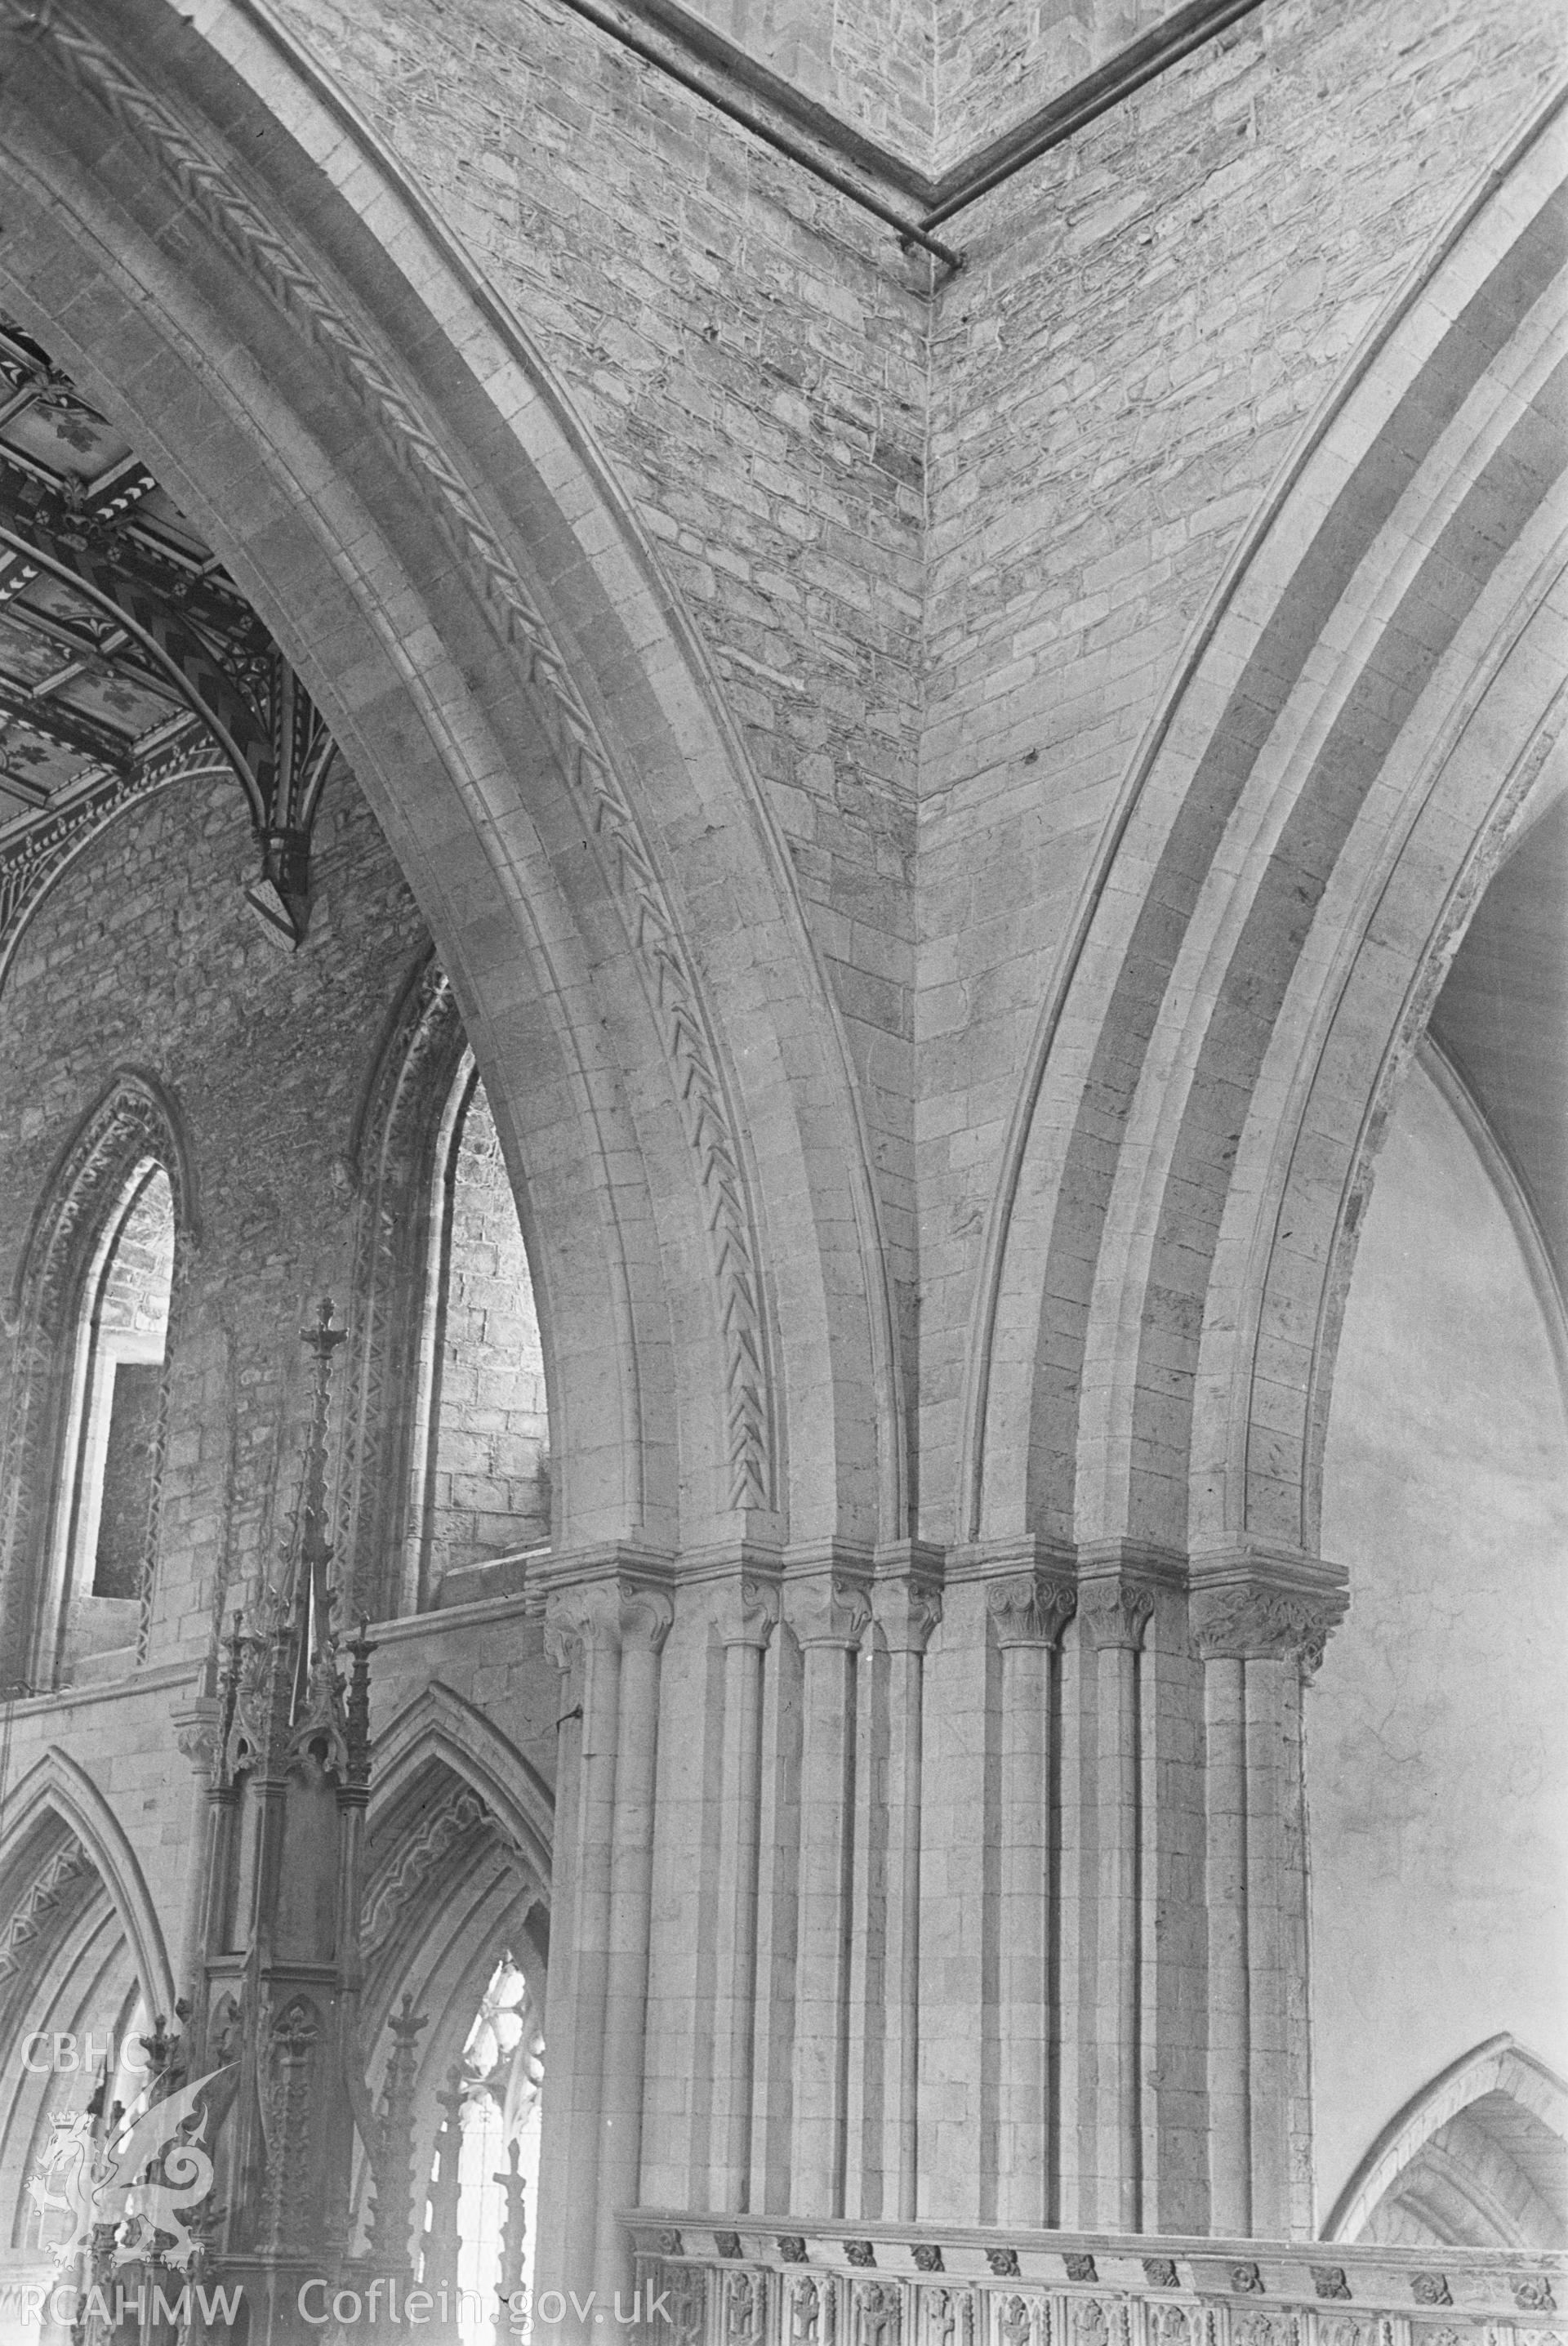 Black and white nitrate negative showing the tower arch at St David's Cathedral.